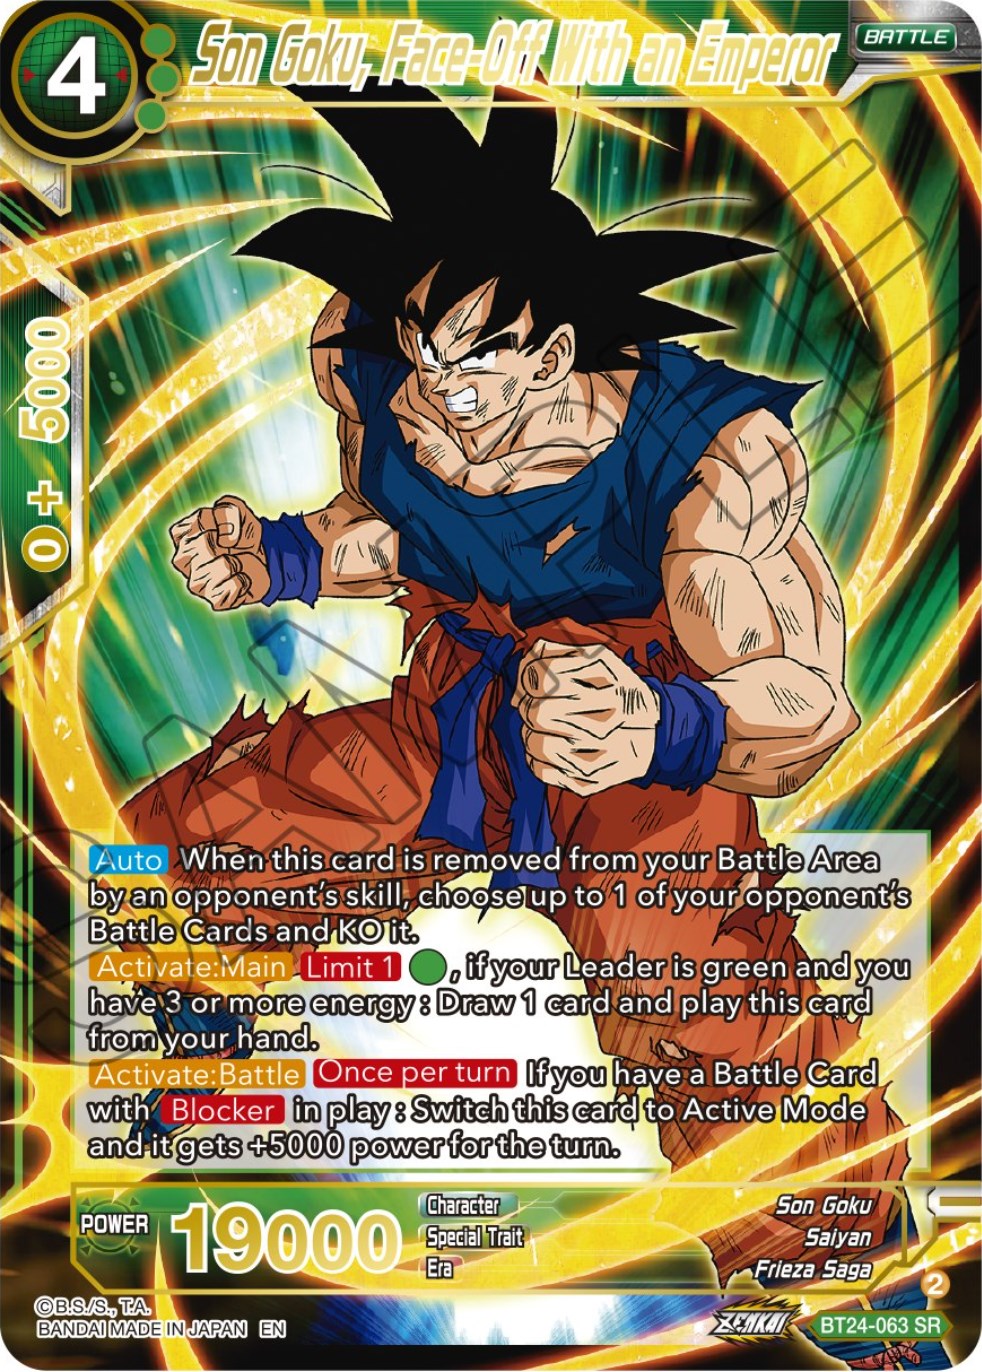 Son Goku, Face-Off With an Emperor (BT24-063) [Beyond Generations] | Pegasus Games WI